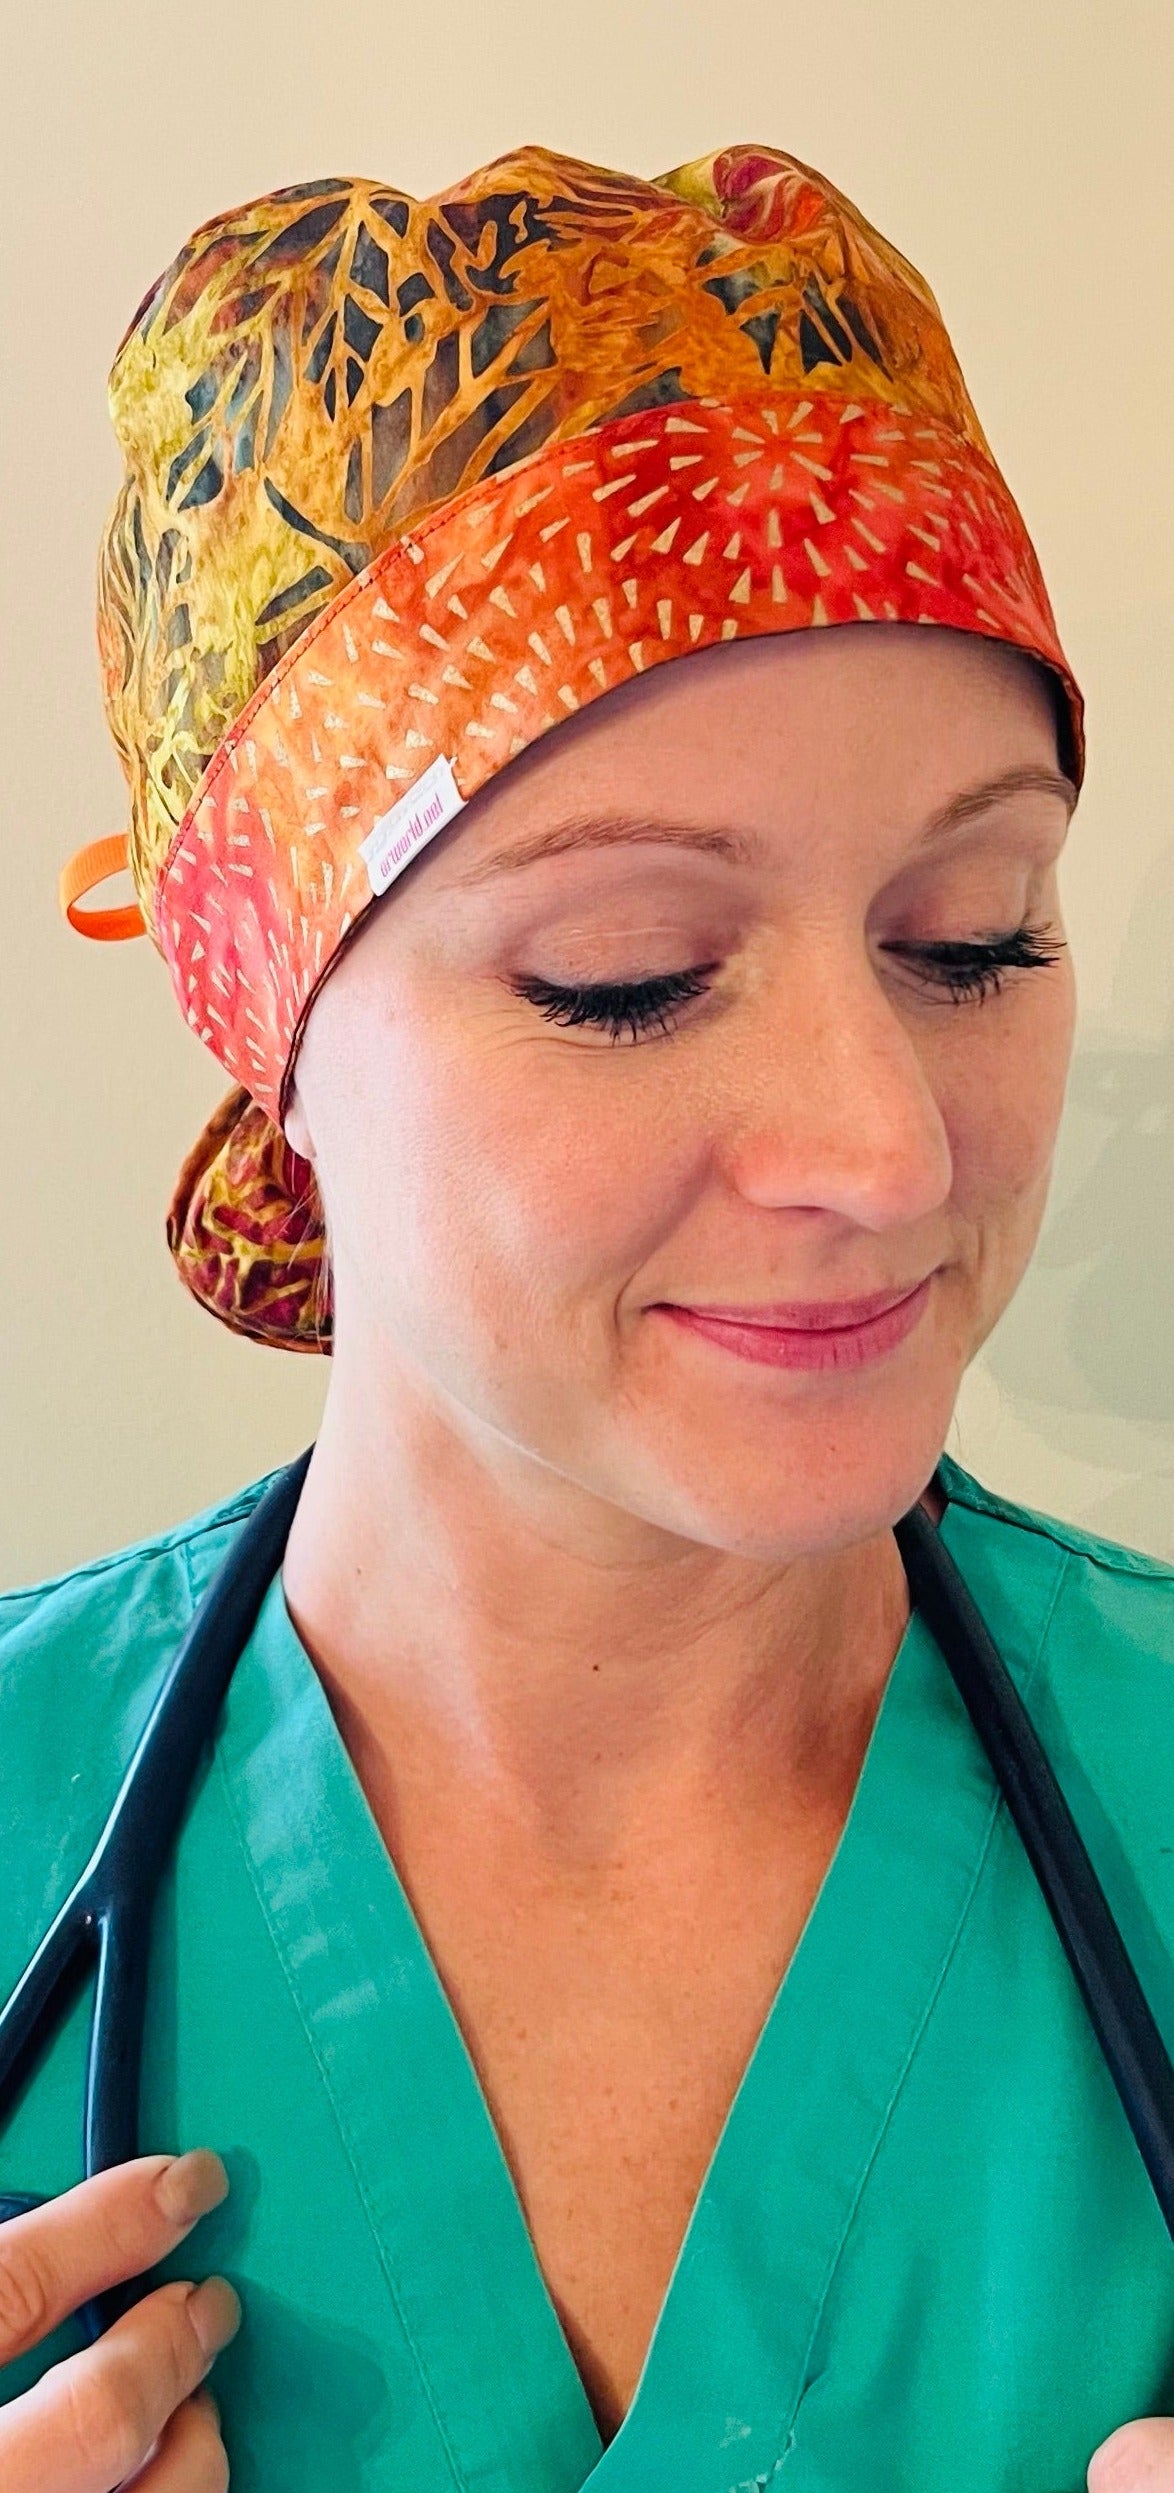 Ponytail Surgical Hat-Fall Vibes with Orange Ribbon Ties